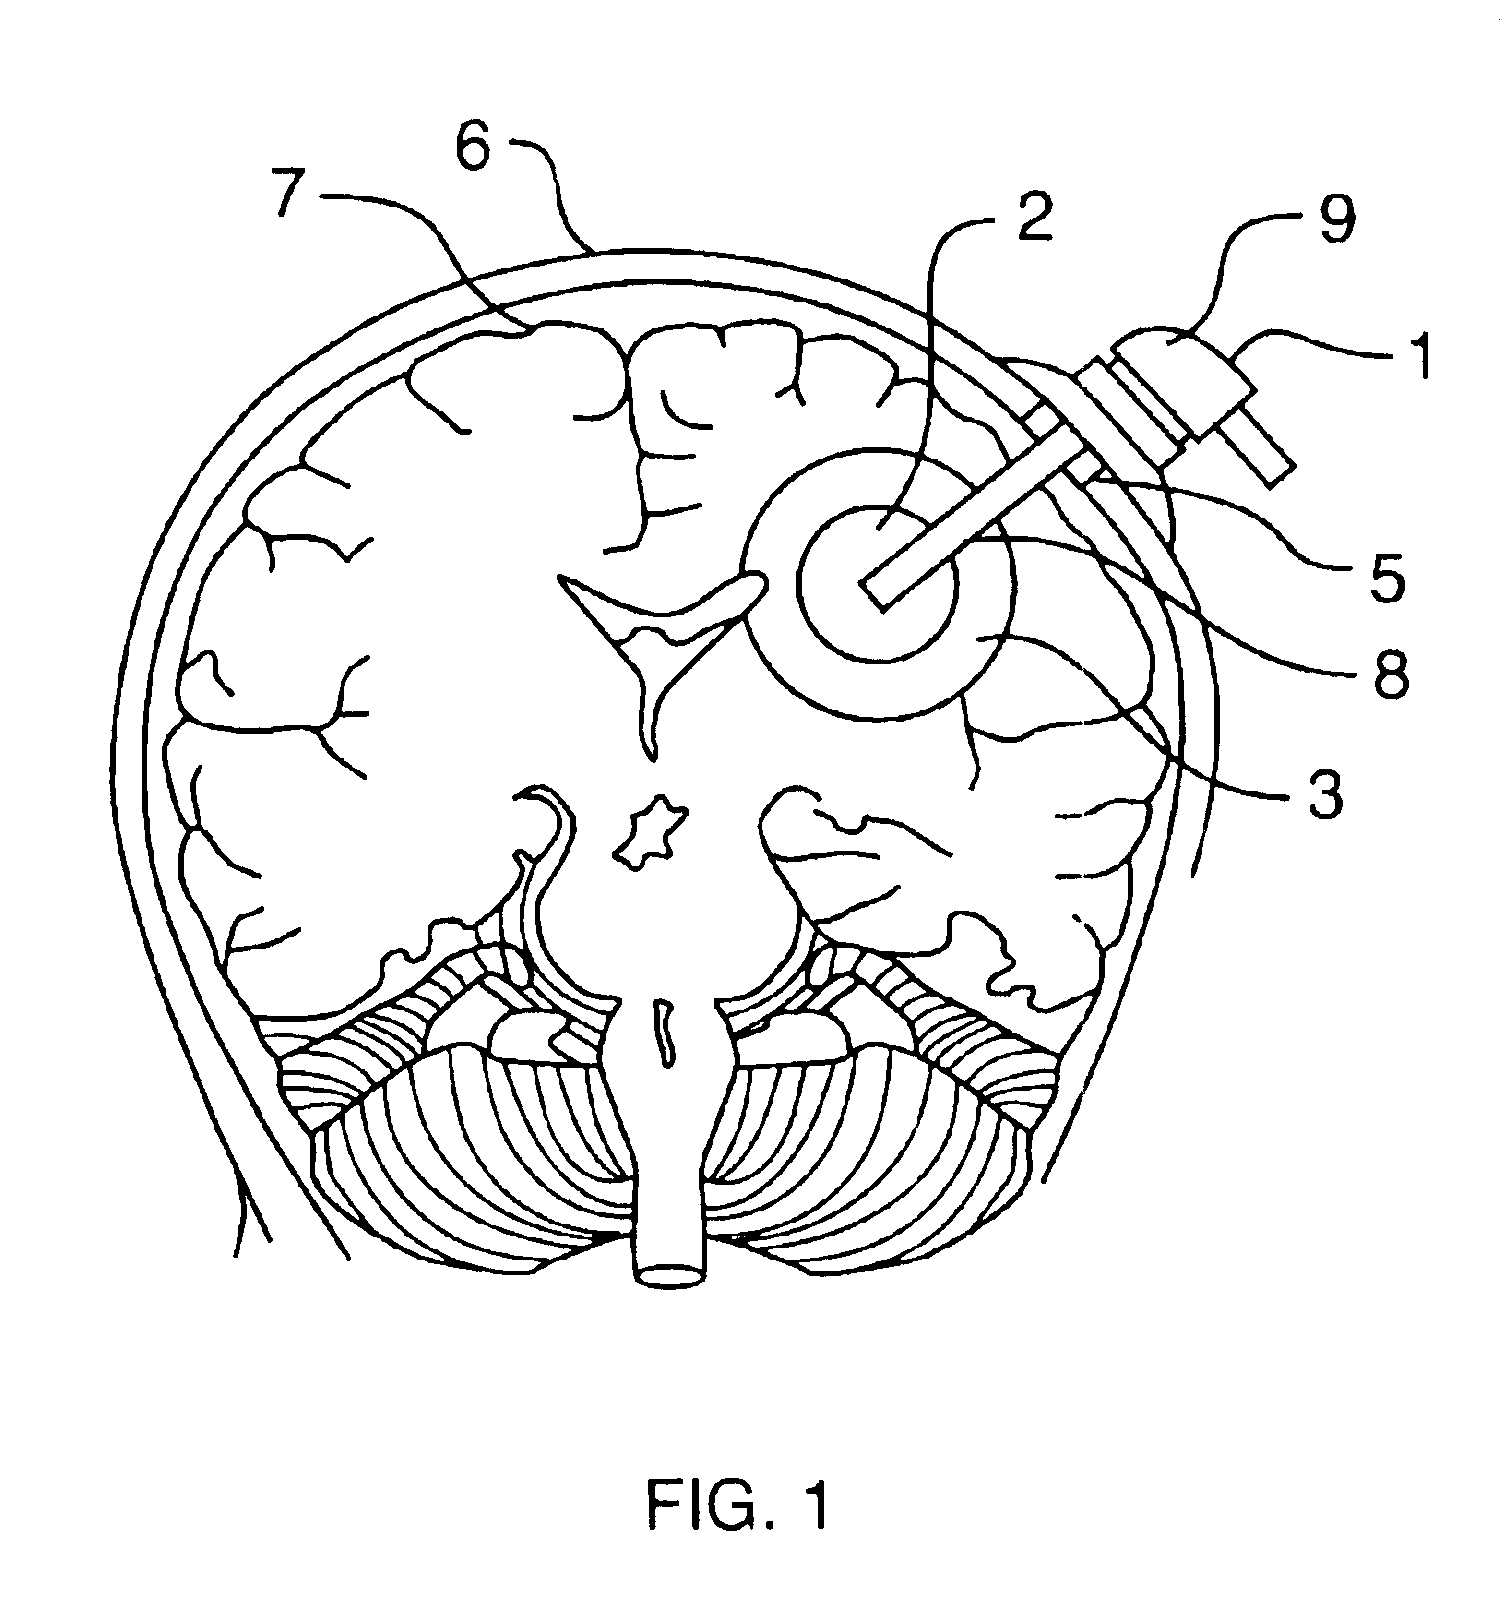 Method and device for reducing death and morbidity from stroke